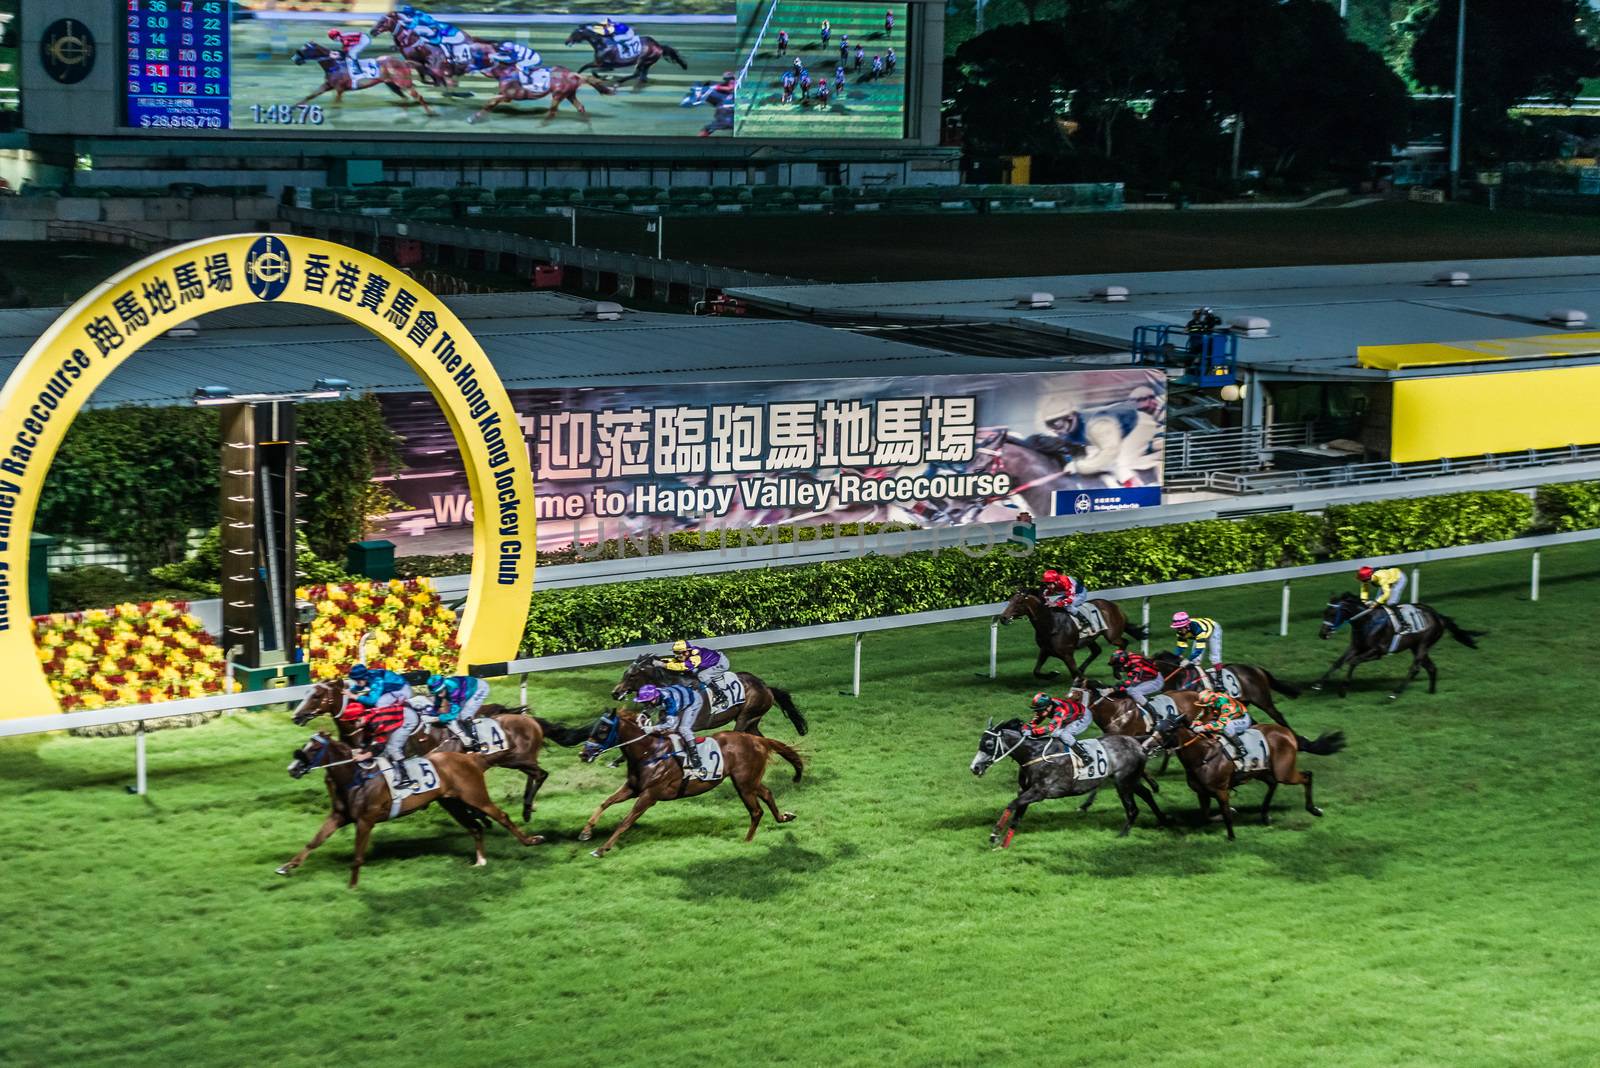 Happy Valley, Hong Kong, China - June 5, 2014: horse race at Happy Valley racecourse